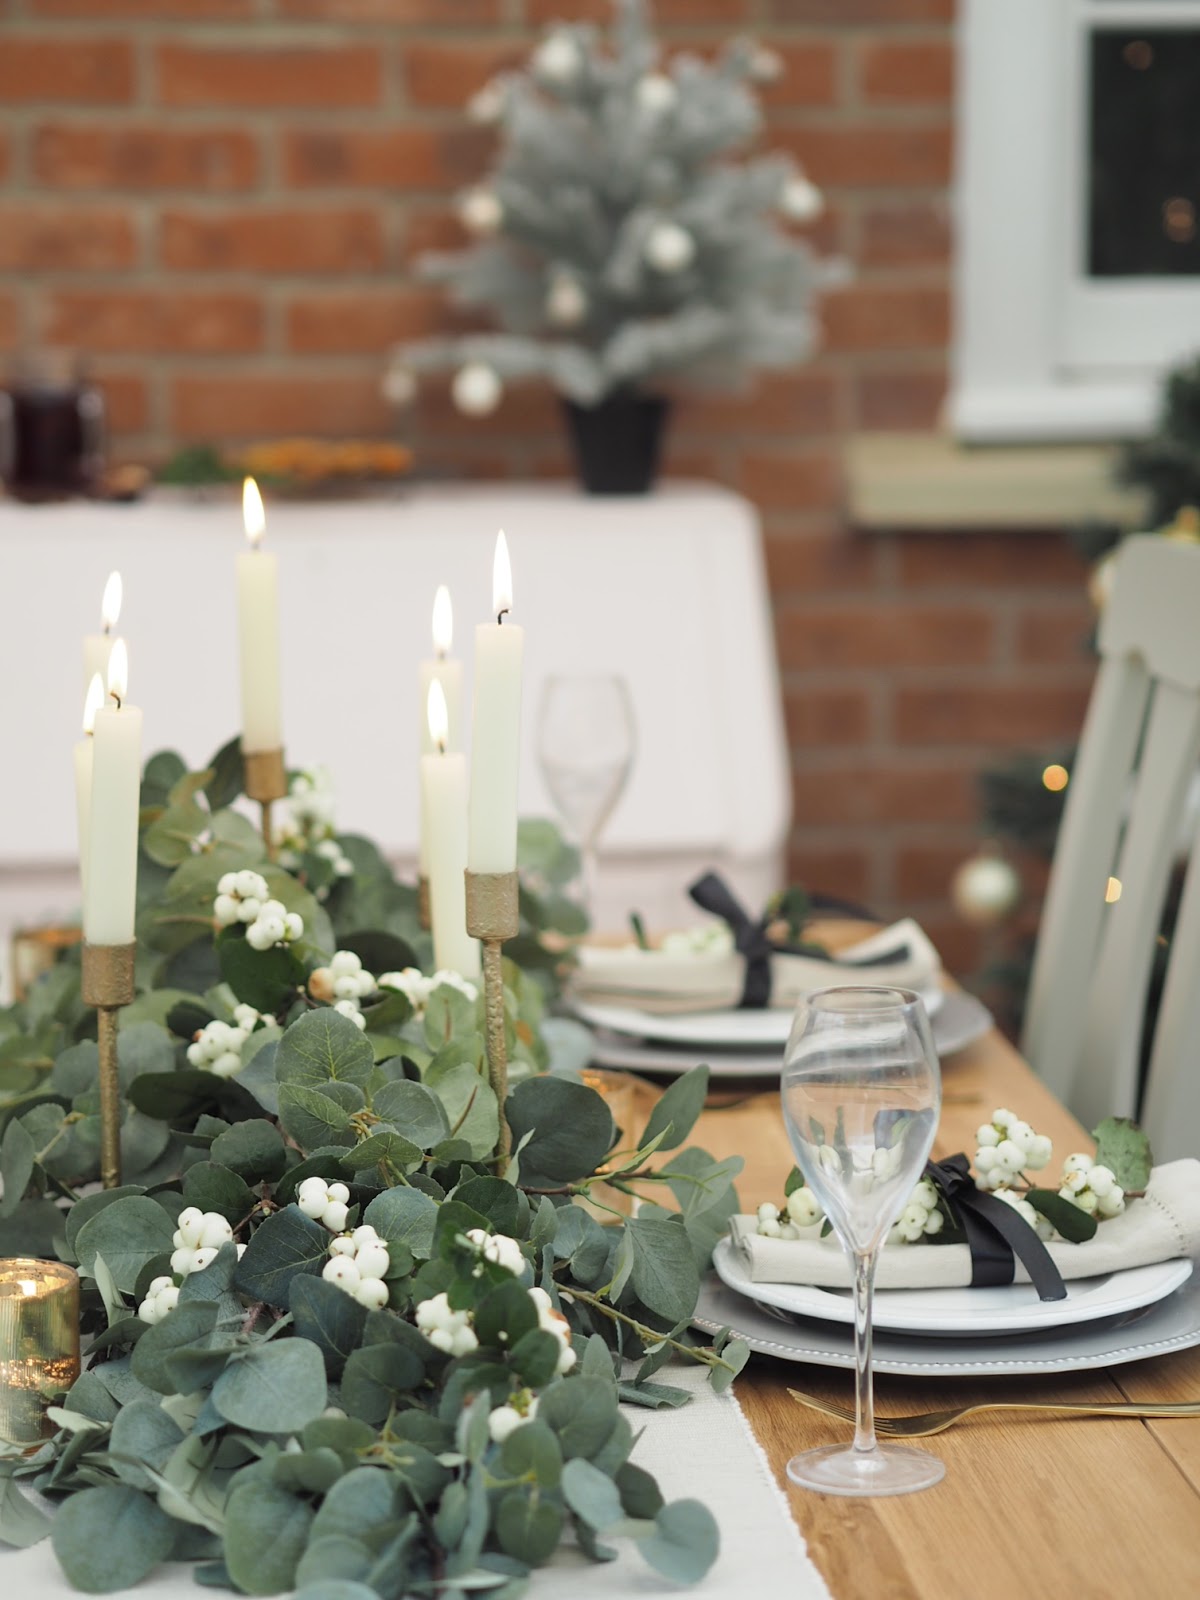 How to decorate your home on a budget and not feel pressured to have an Instagram pinterest perfect Christmas home. Choose budget interiors and make your own decorations for pennies to create a magical christmas home.